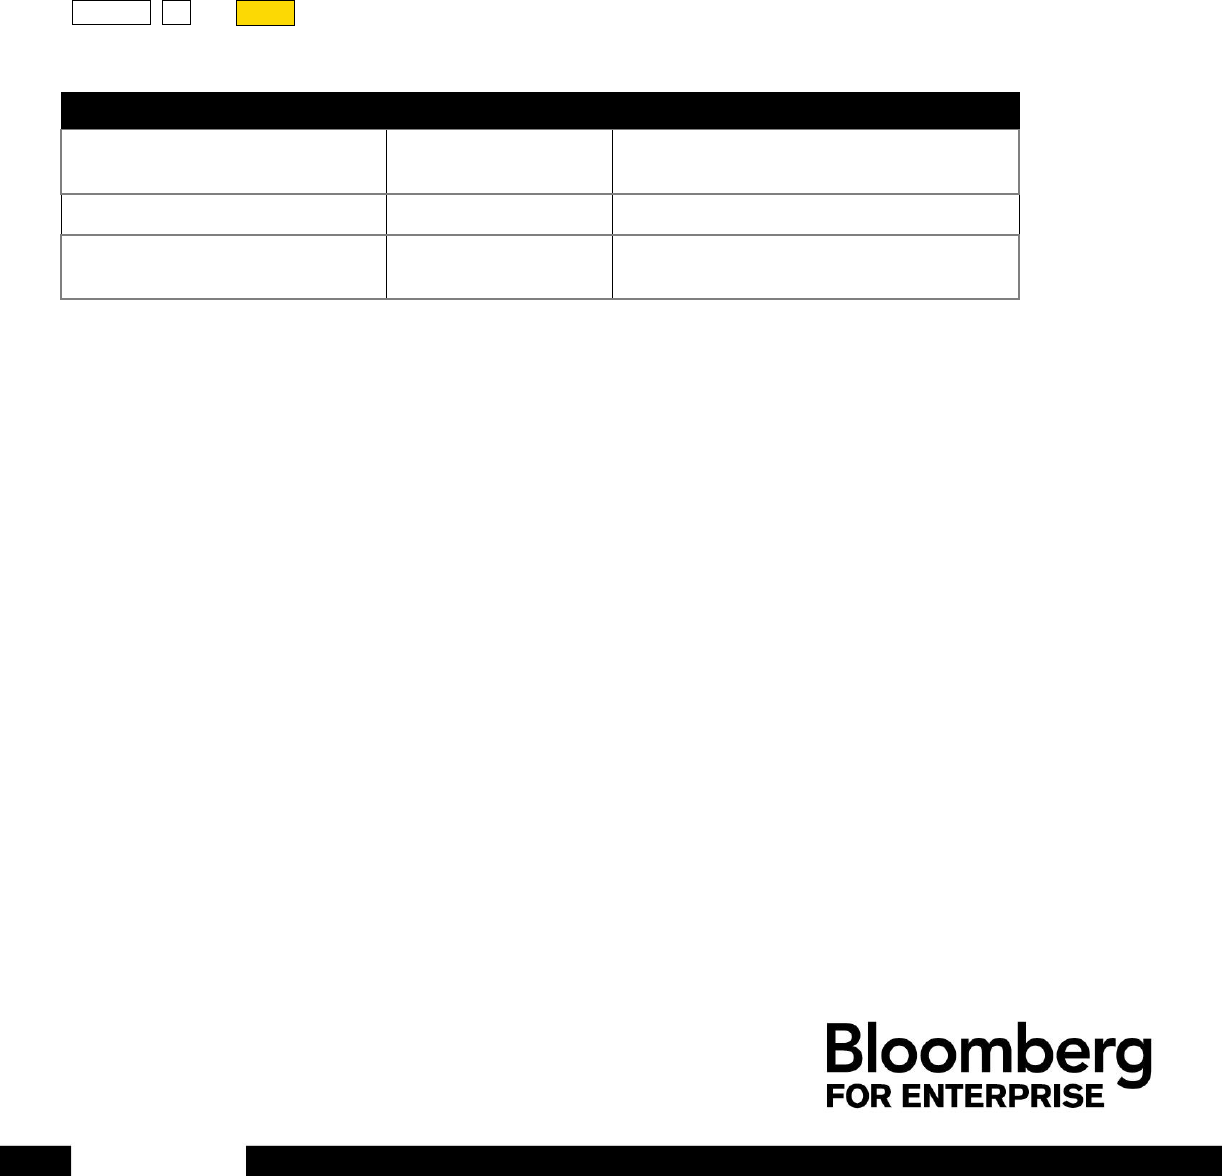 The Bloomberg Terminal: Step By Step